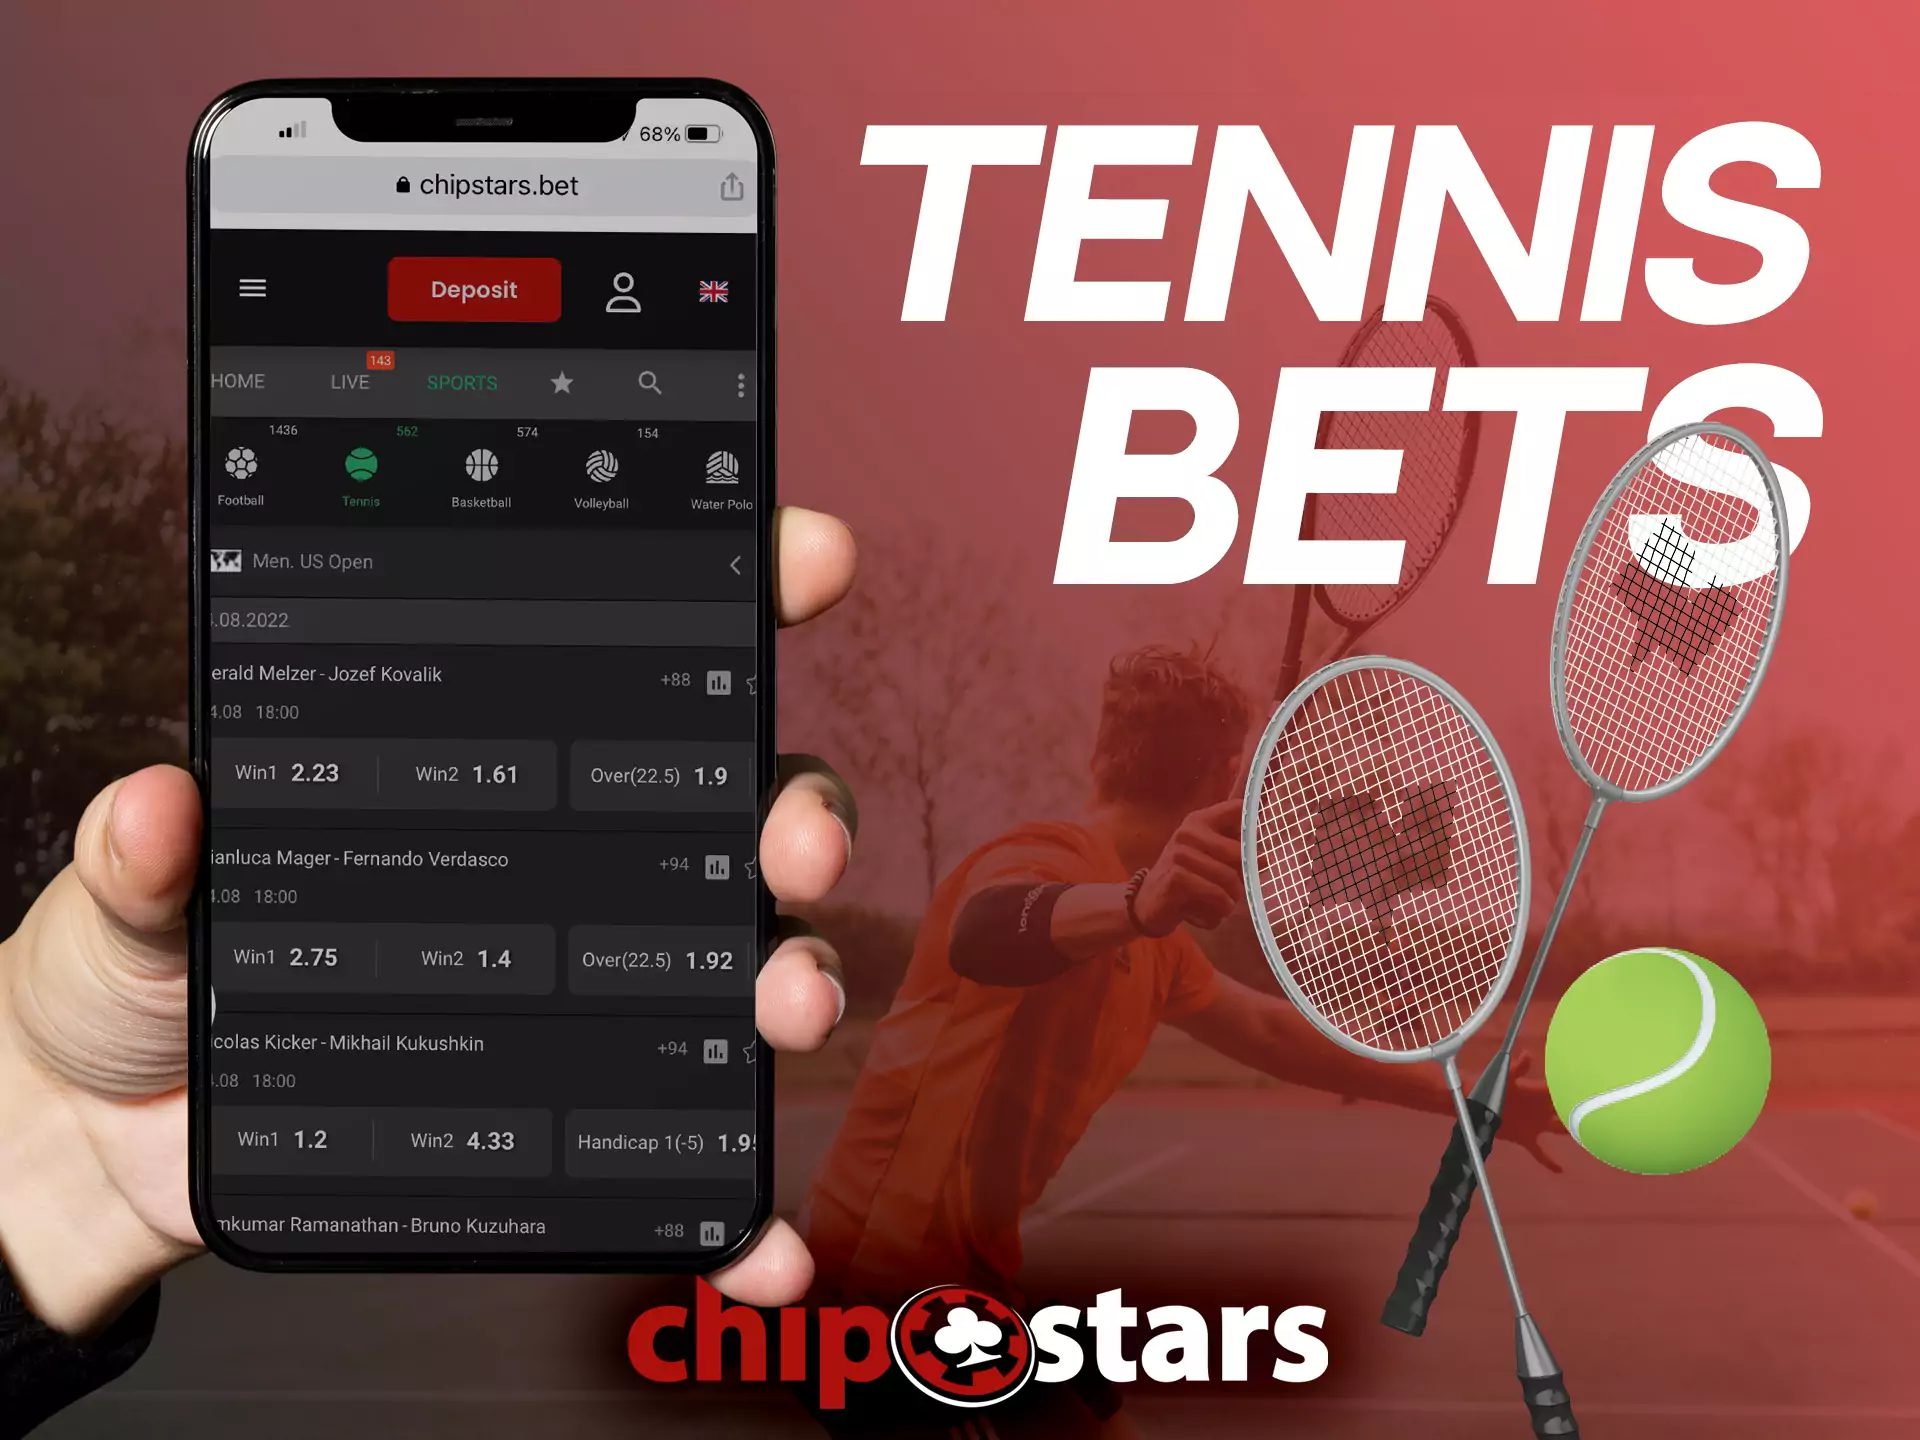 In the Chipstars sportsbook, you can bet on tennis matches.